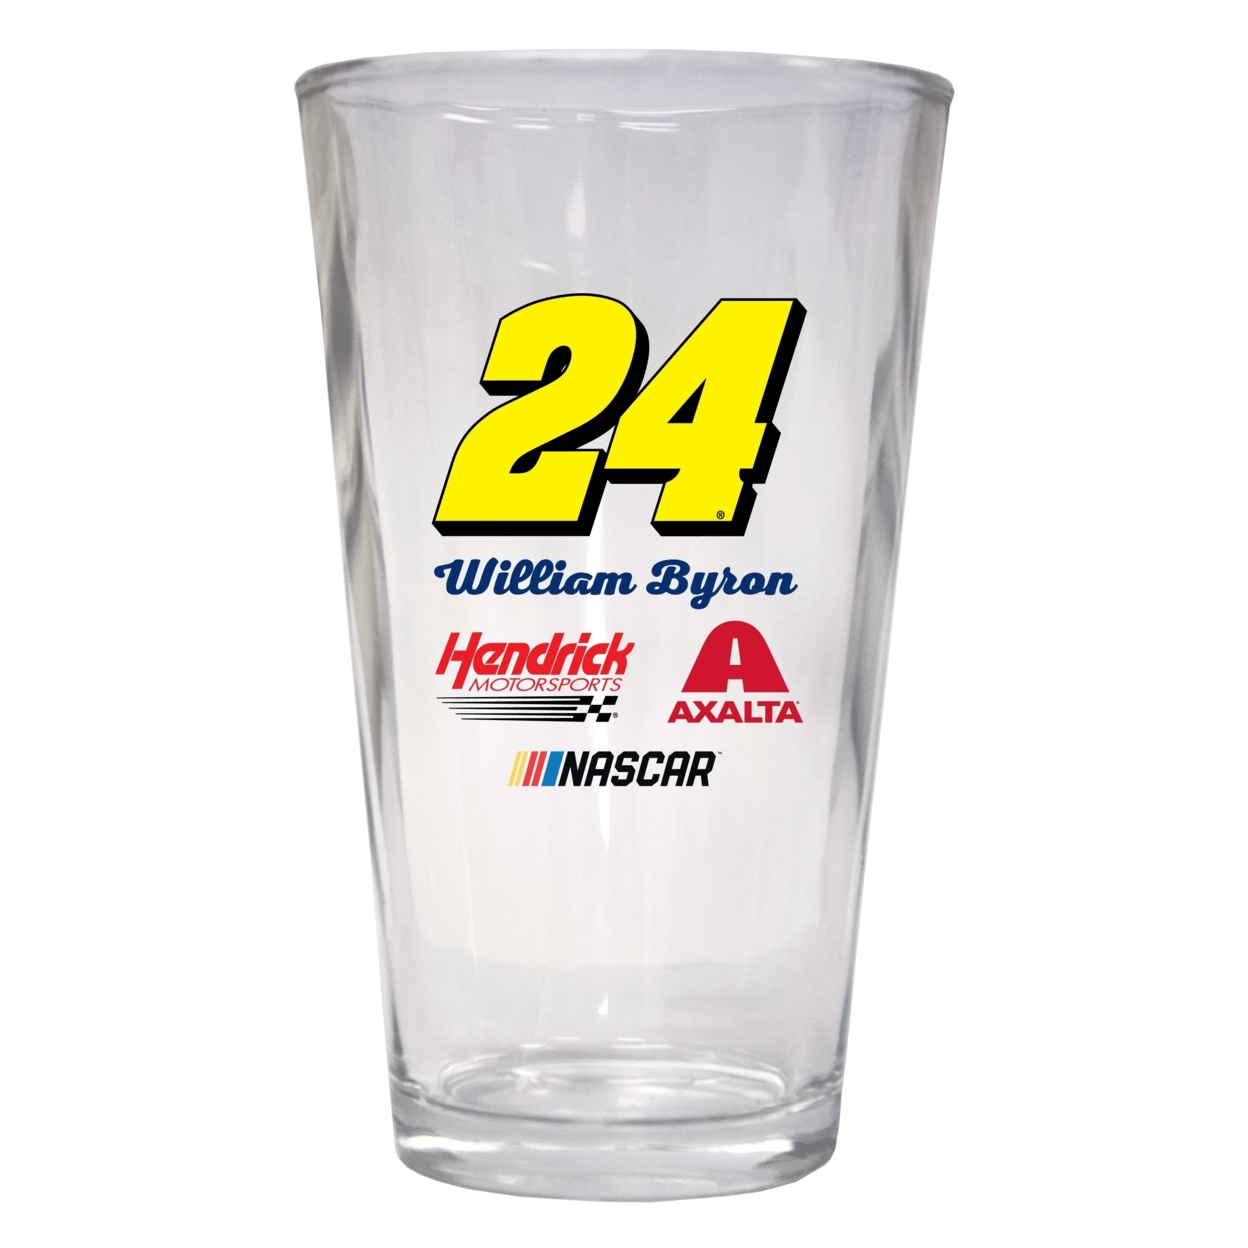 William Byron #24 NASCAR Pint Glass New For 2020